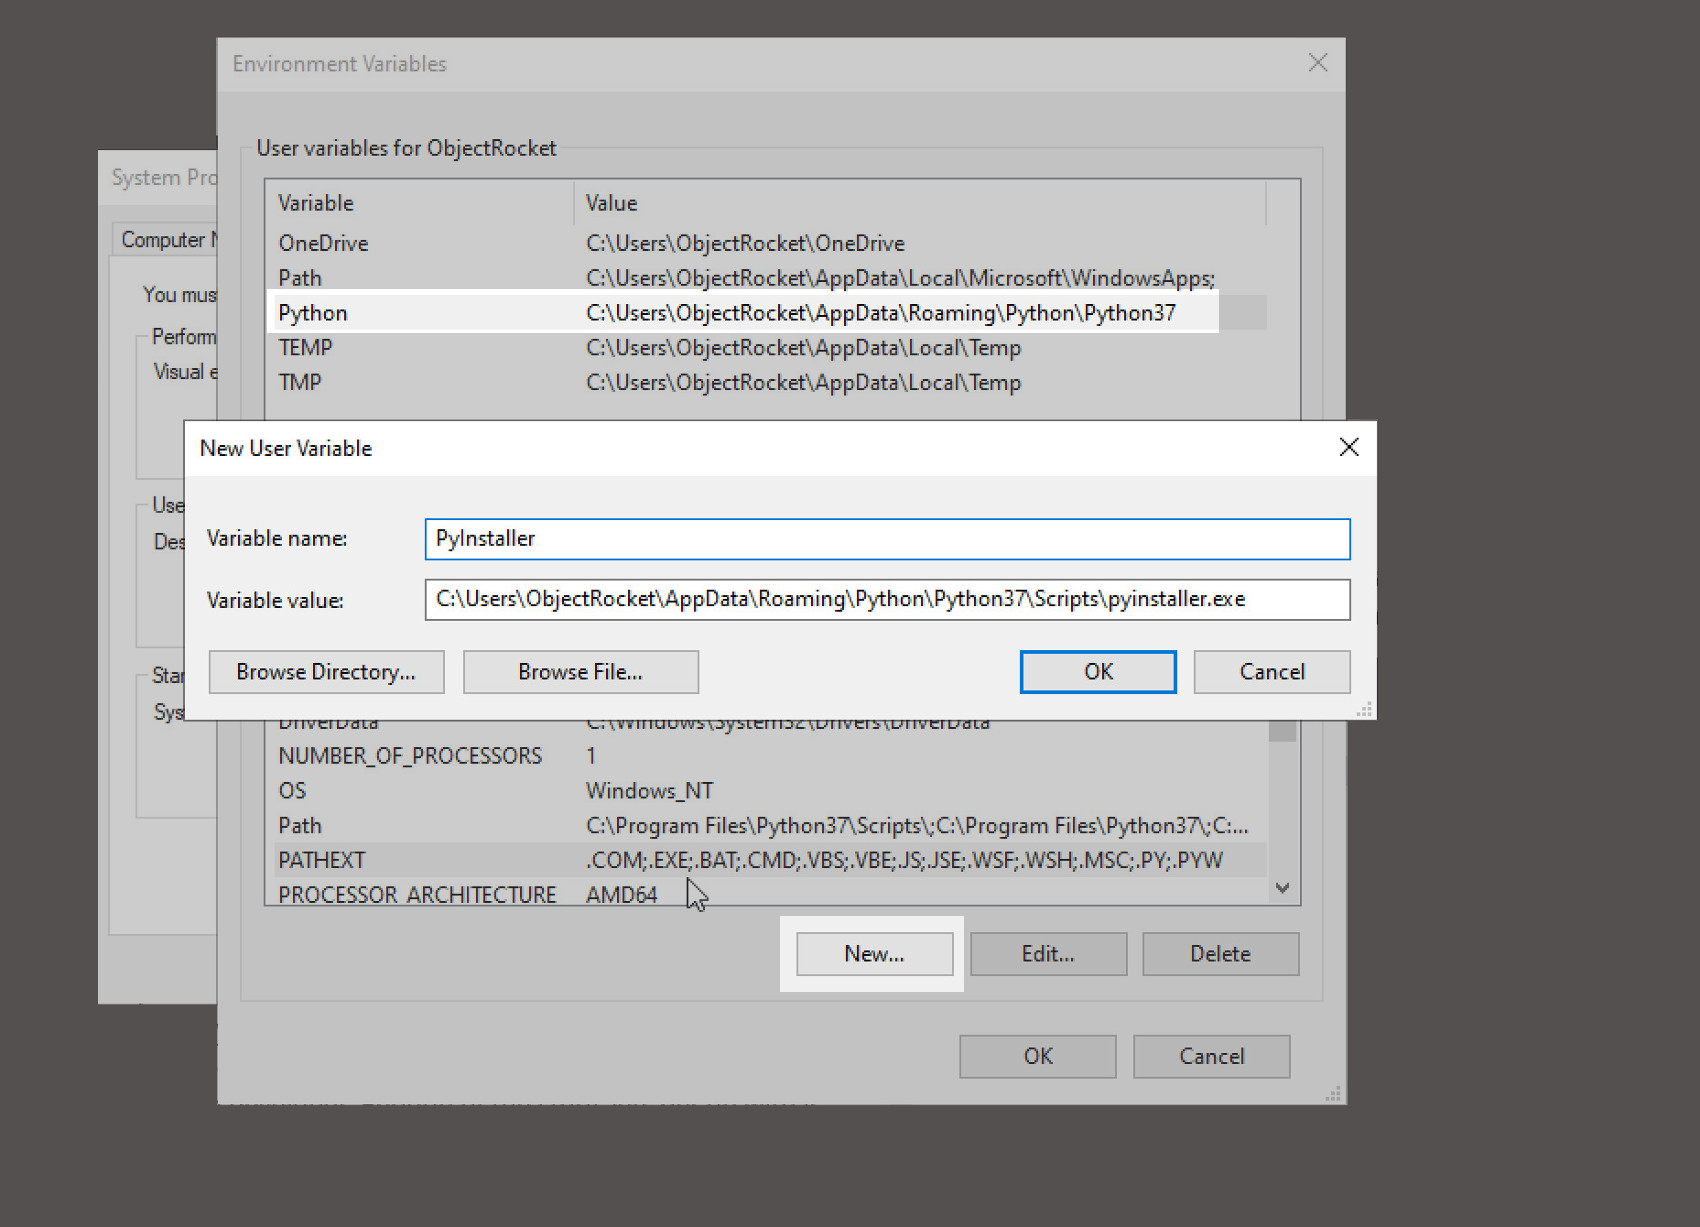 Screenshot of the user variables in the Environmental Variables settings for Windows